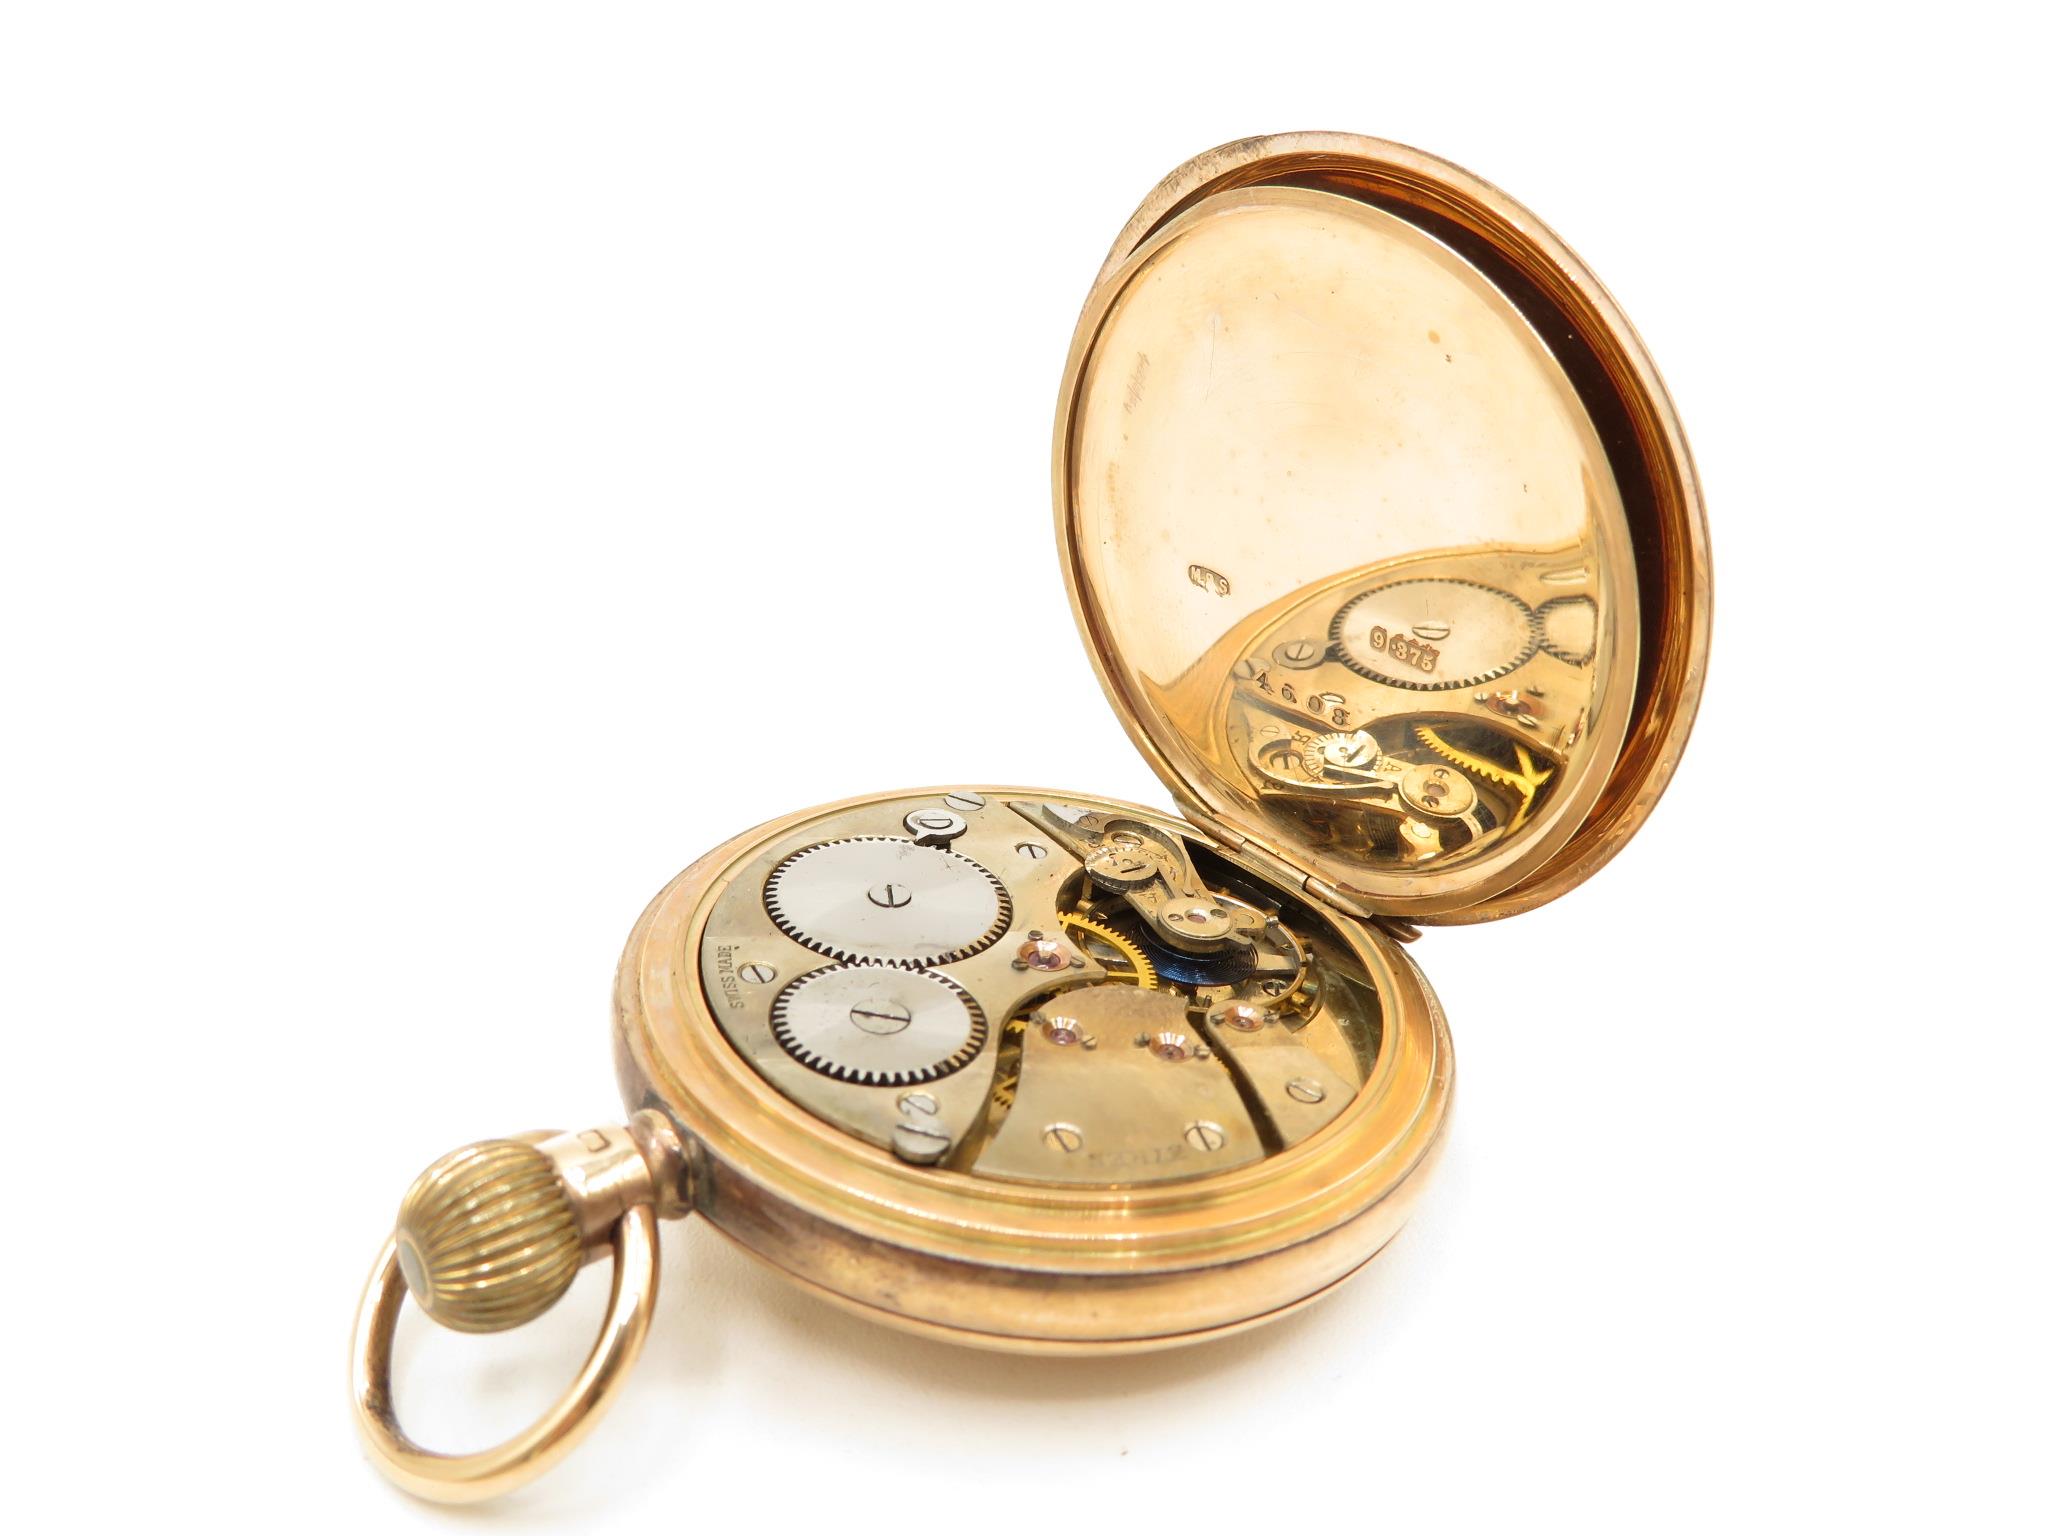 9ct cased Half Hunter pocket watch - weight 102g - with box - Image 4 of 4